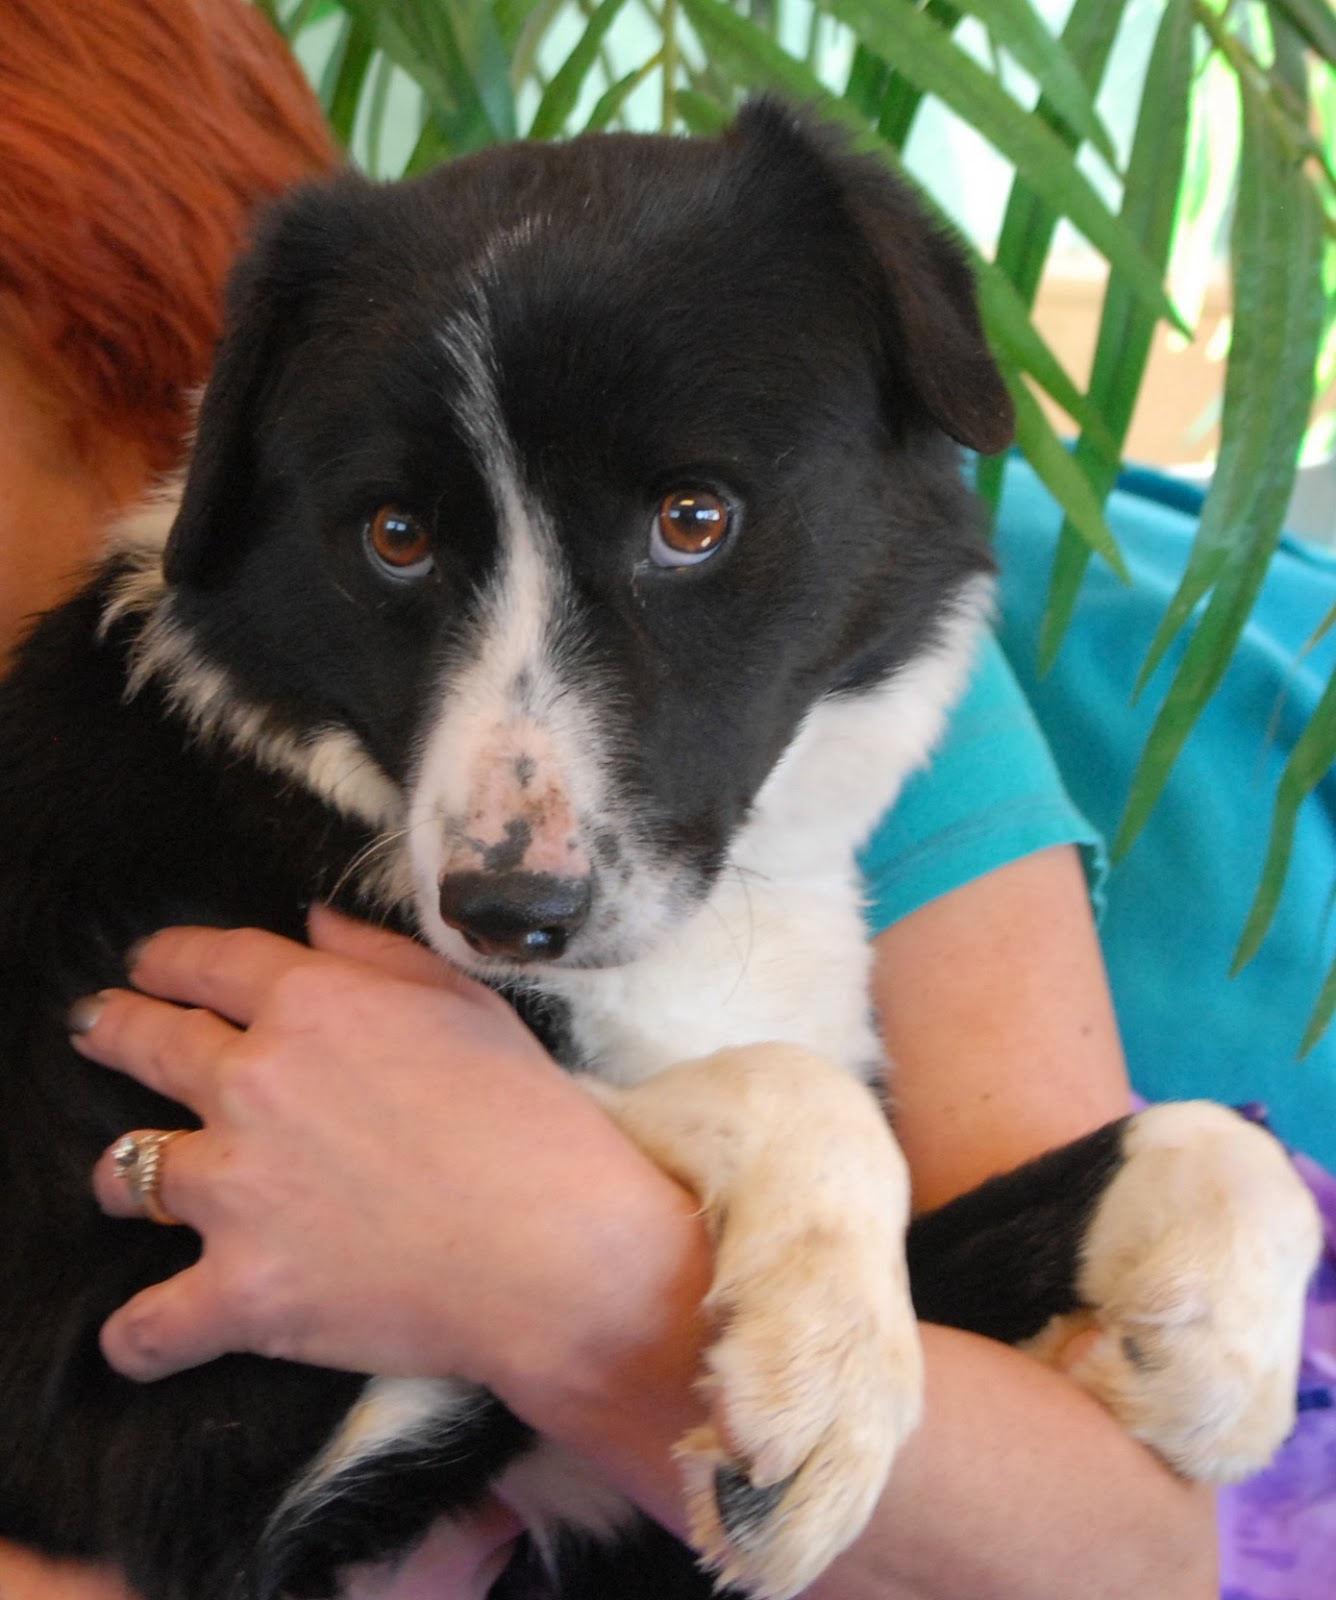 3 Border Collie mix puppies who need a hero.